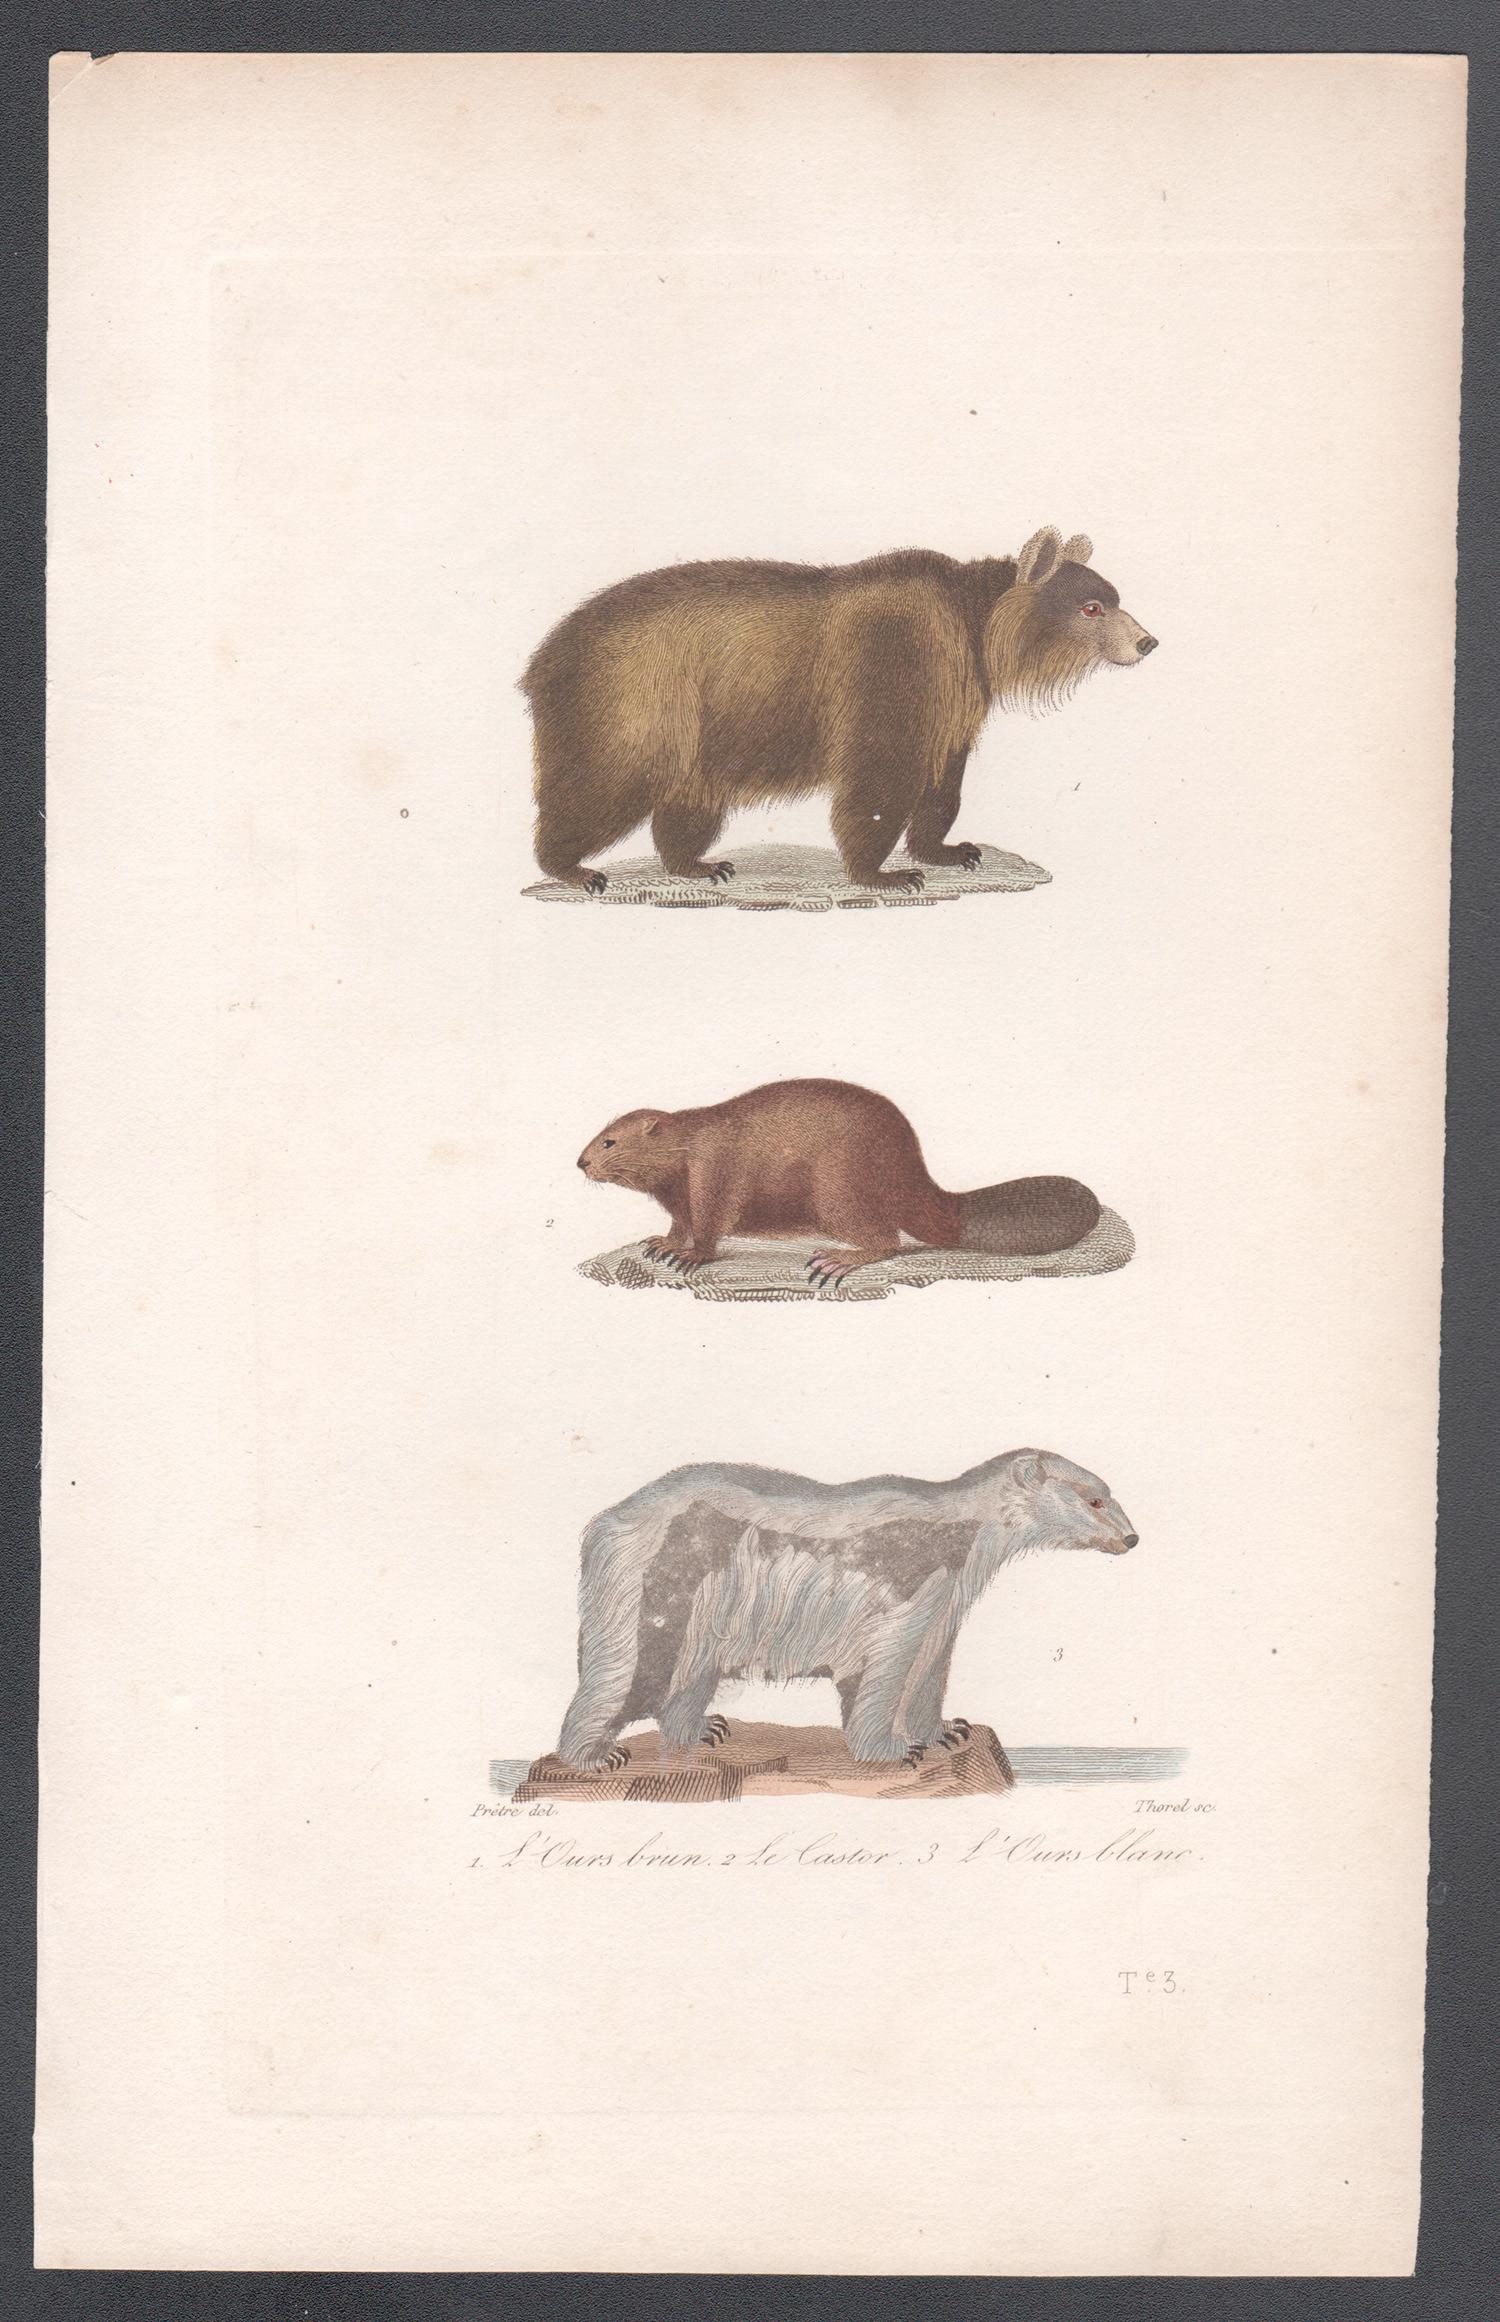 Brown Bears, Beaver, Polar Bear, mid 19th French century animal engraving - Print by Unknown